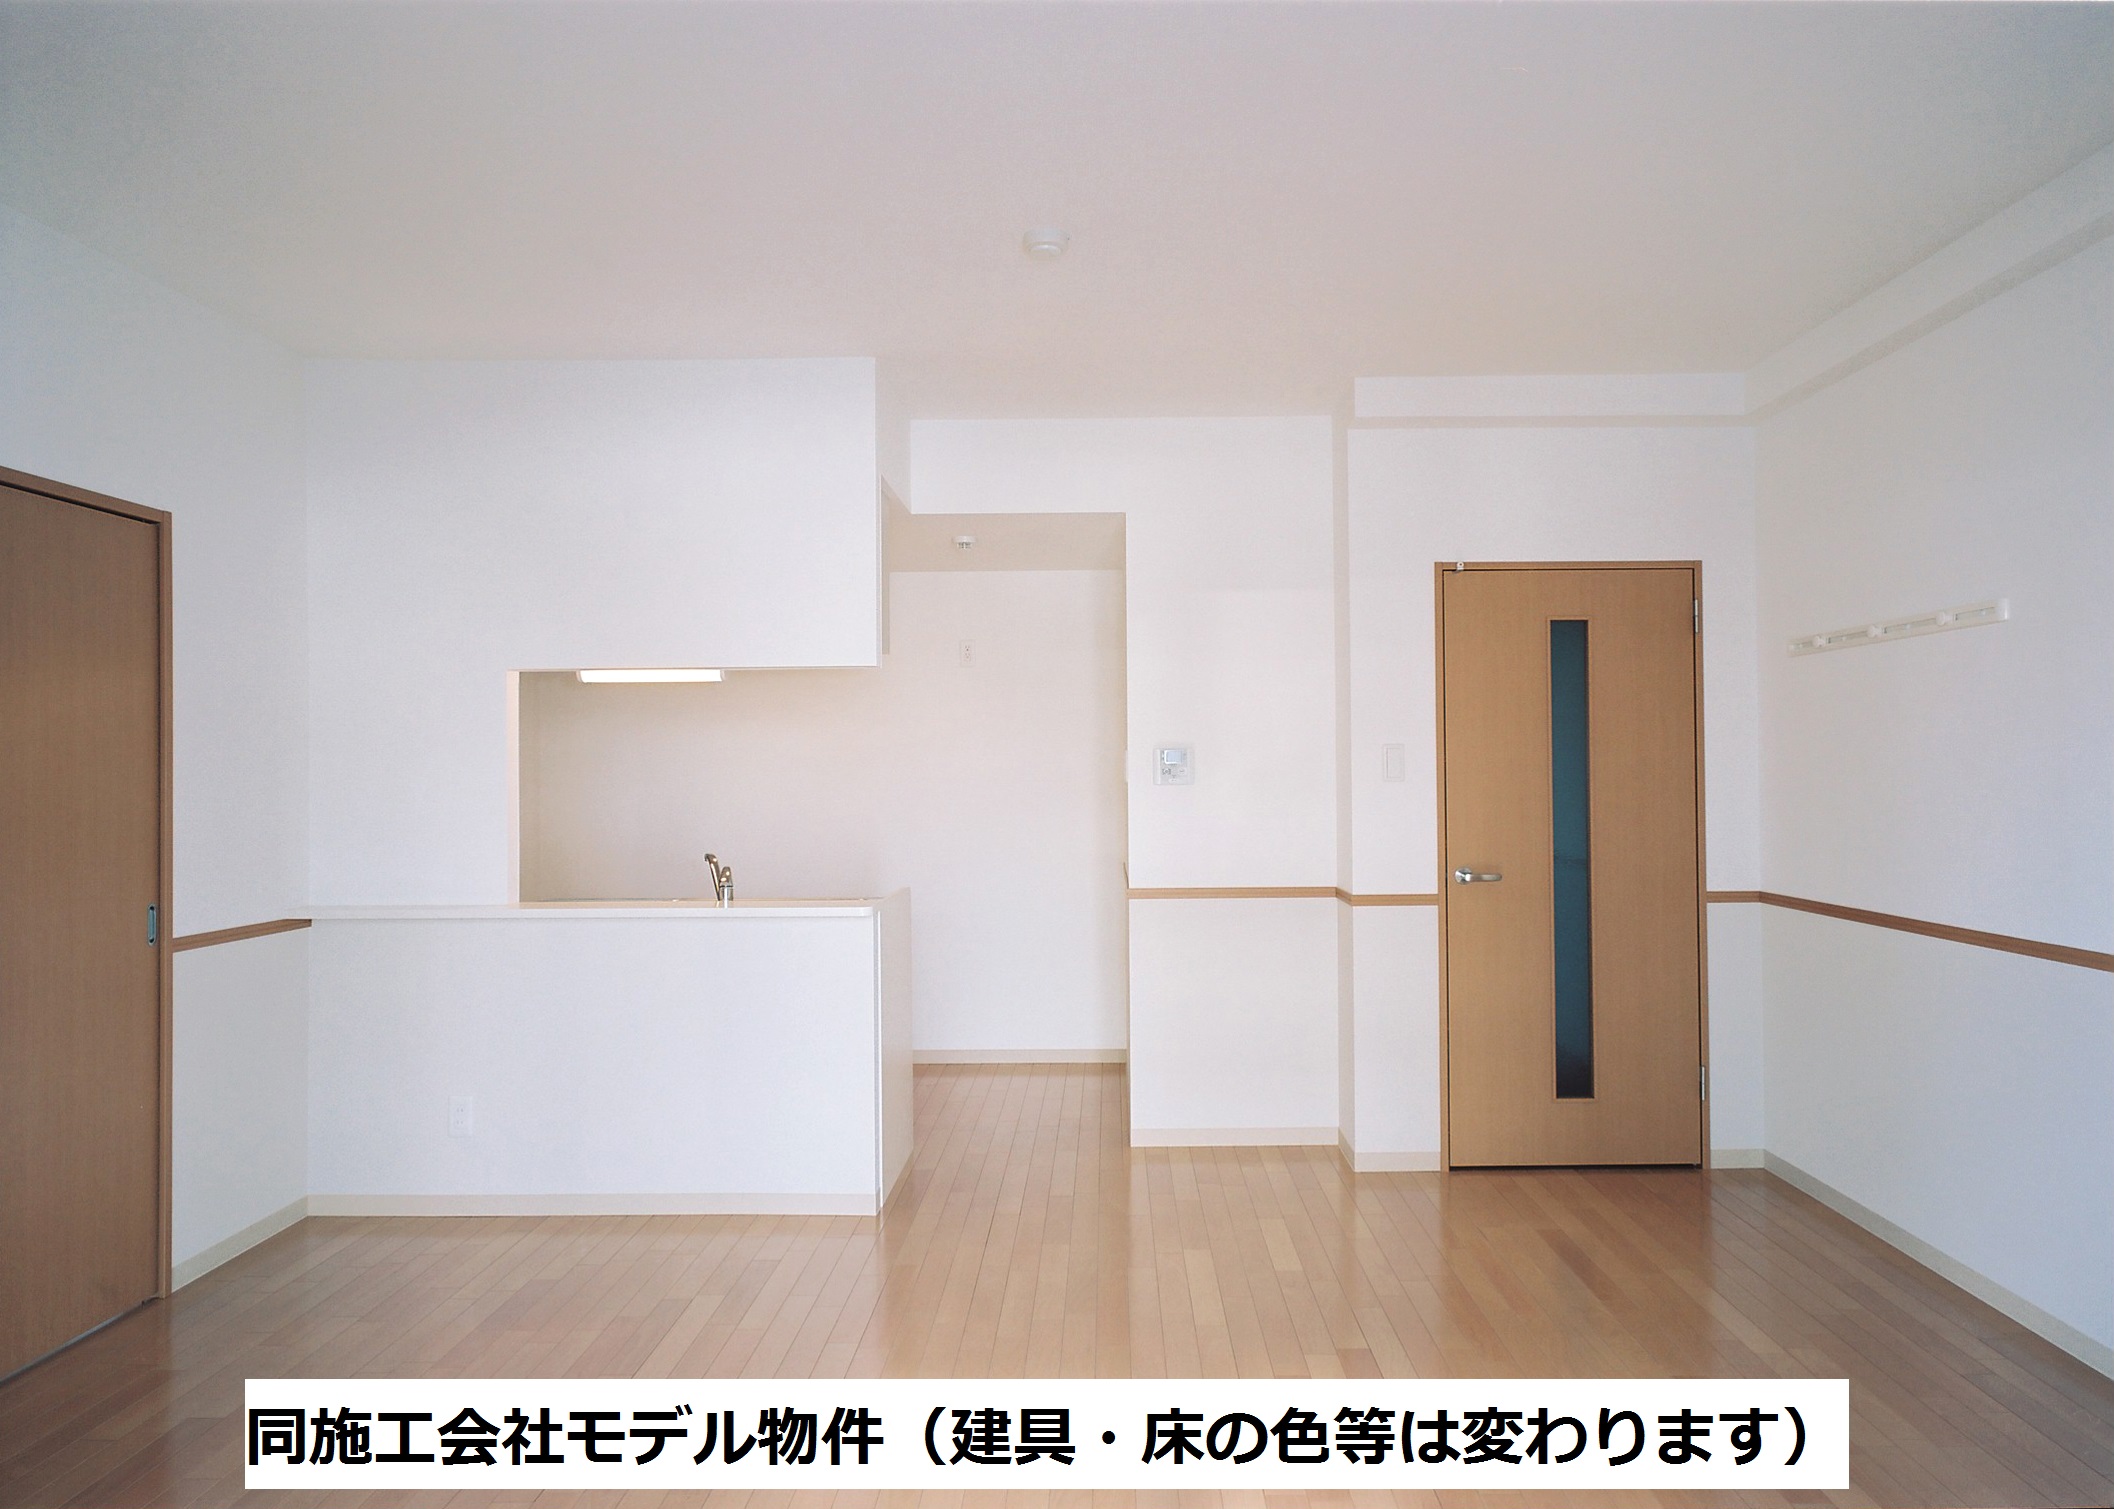 Living and room. It is a photograph of the same construction company model properties